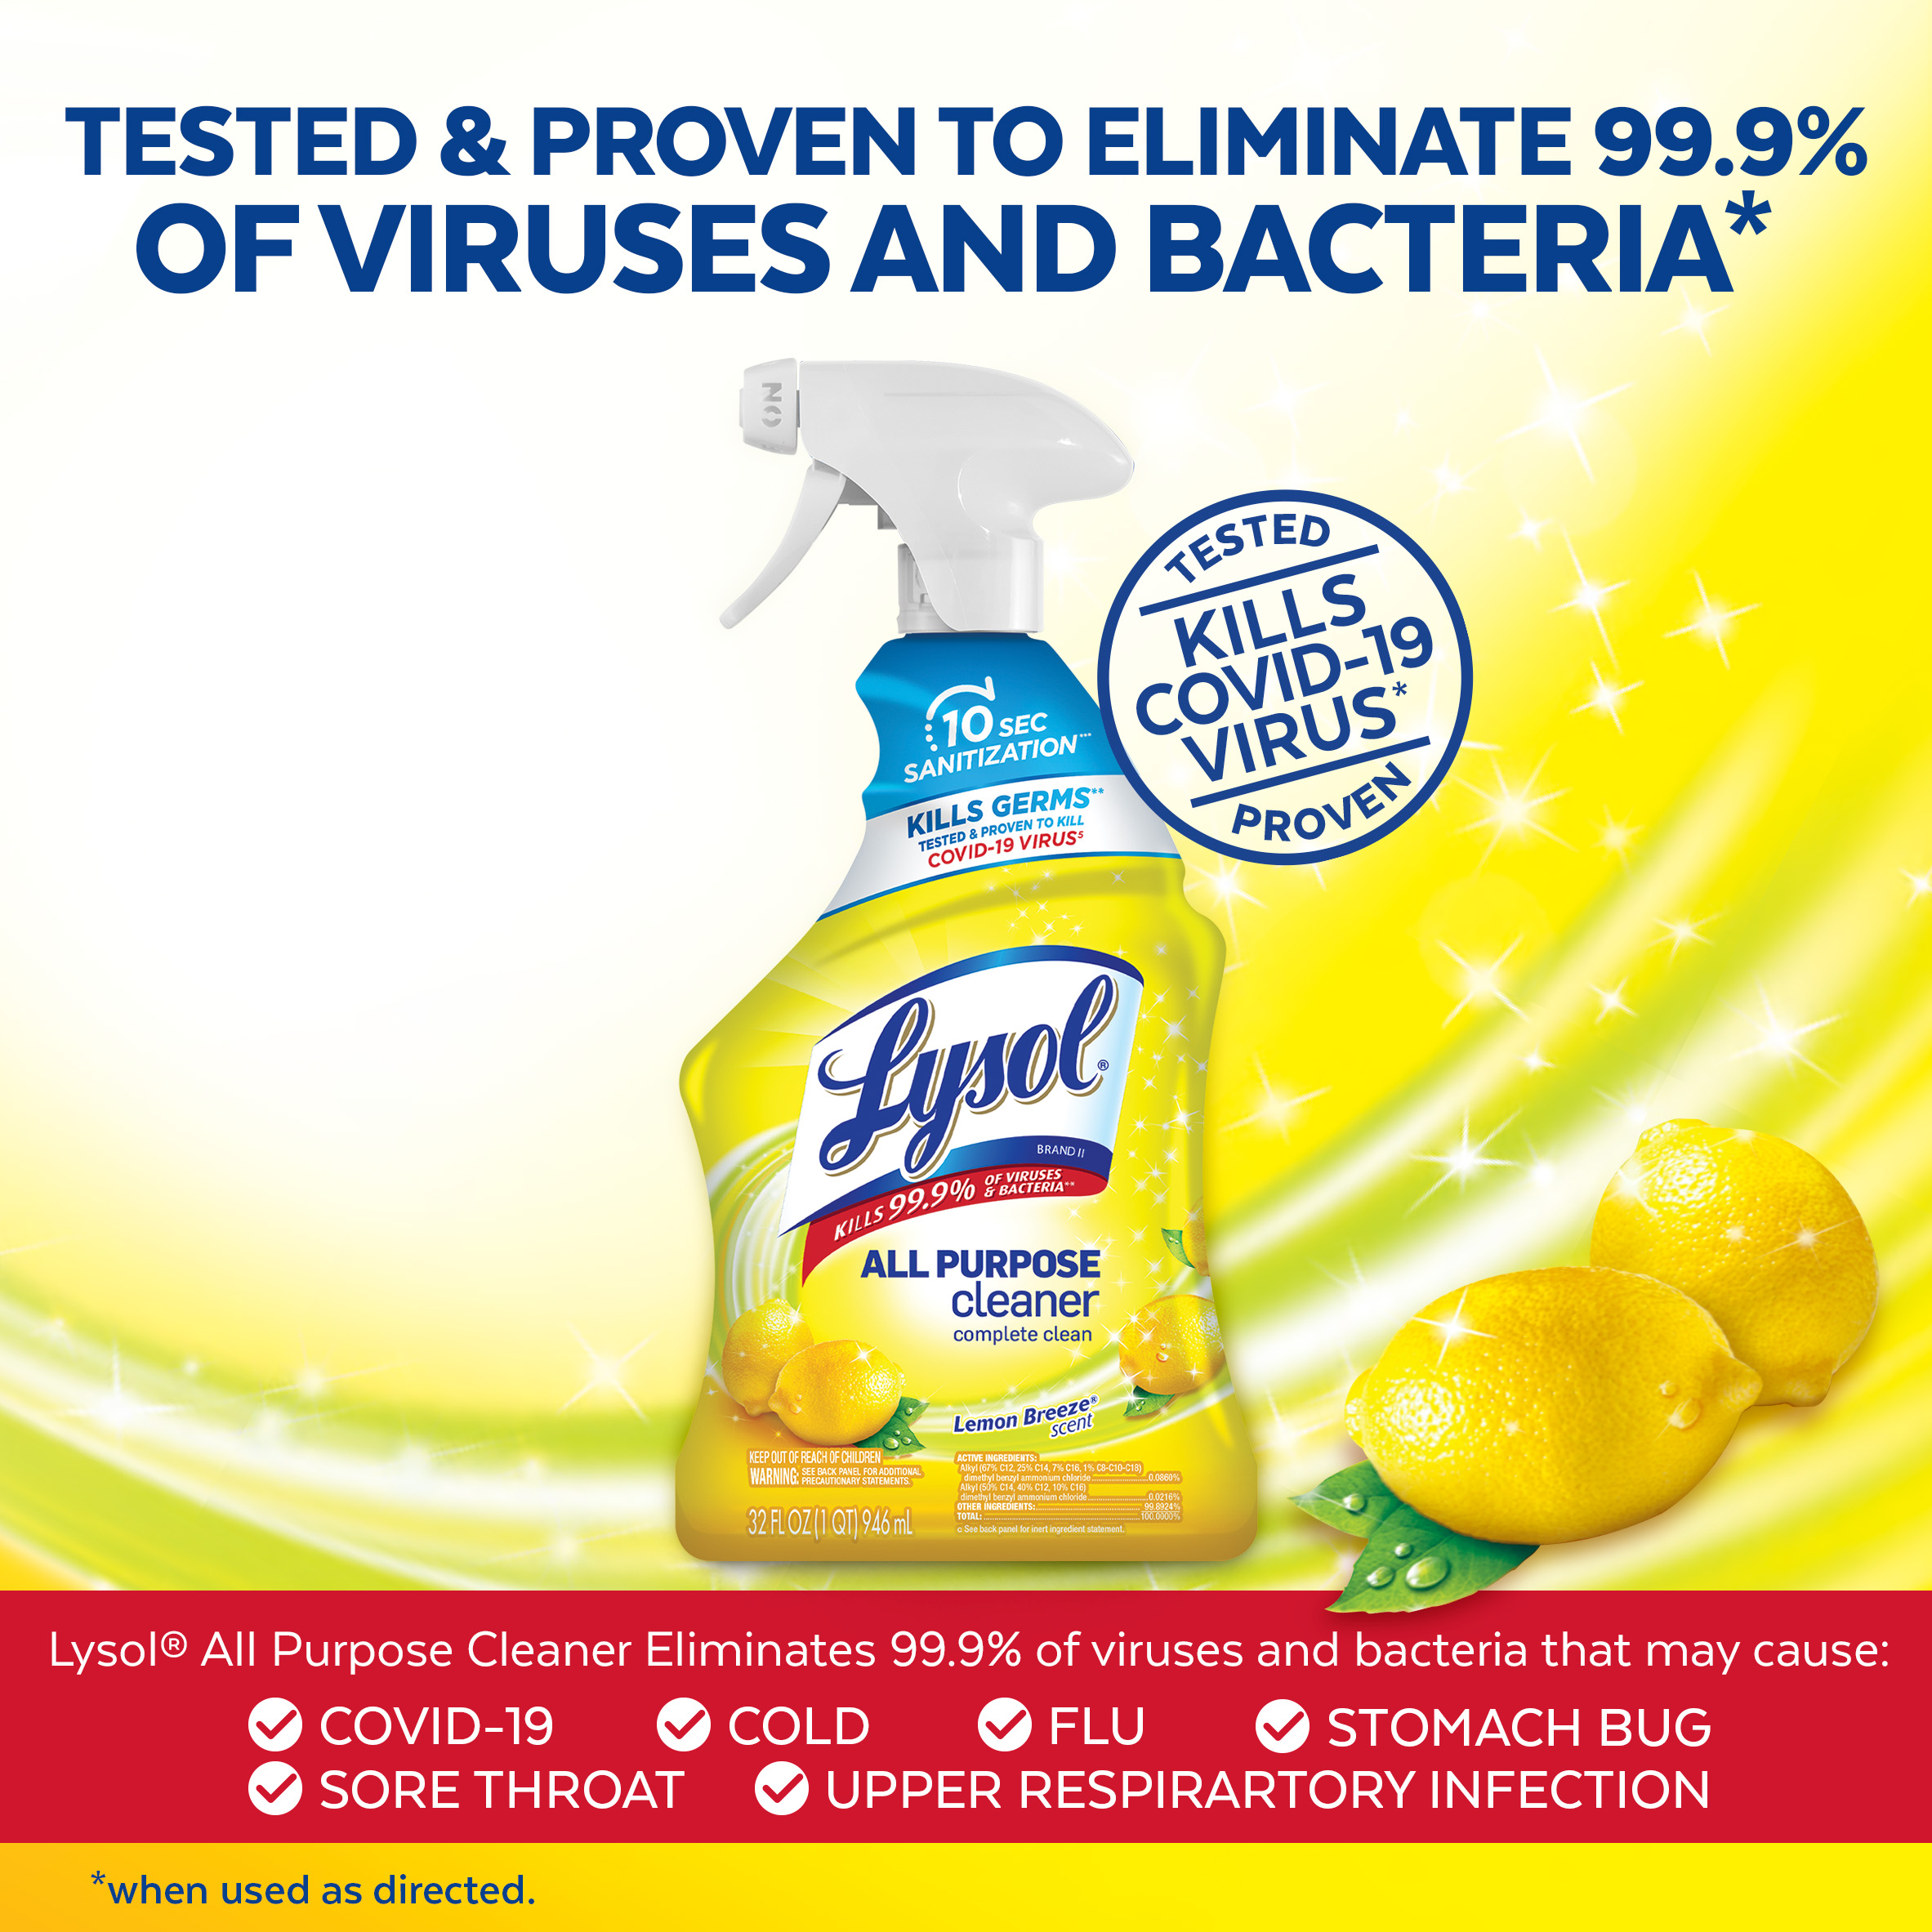 Lysol All-Purpose Cleaner, Sanitizing and Disinfecting Spray, To Clean and Deodorize, Lemon Breeze Scent, 32oz - image 3 of 6